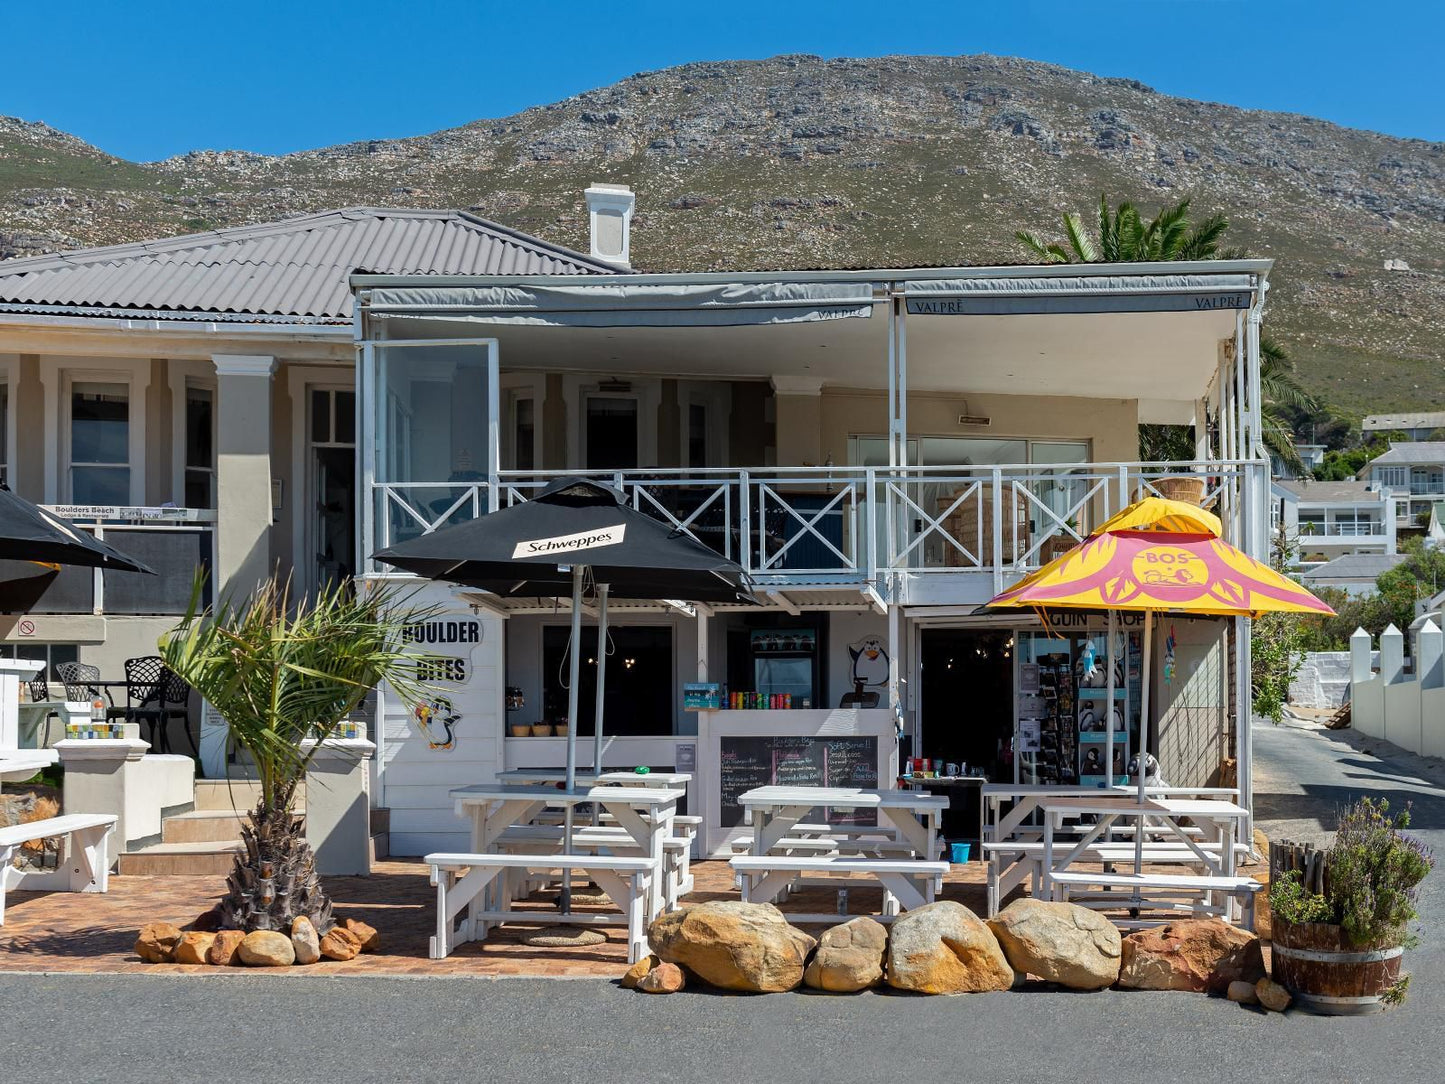 Boulders Beach Hotel Simons Town Cape Town Western Cape South Africa House, Building, Architecture, Bar